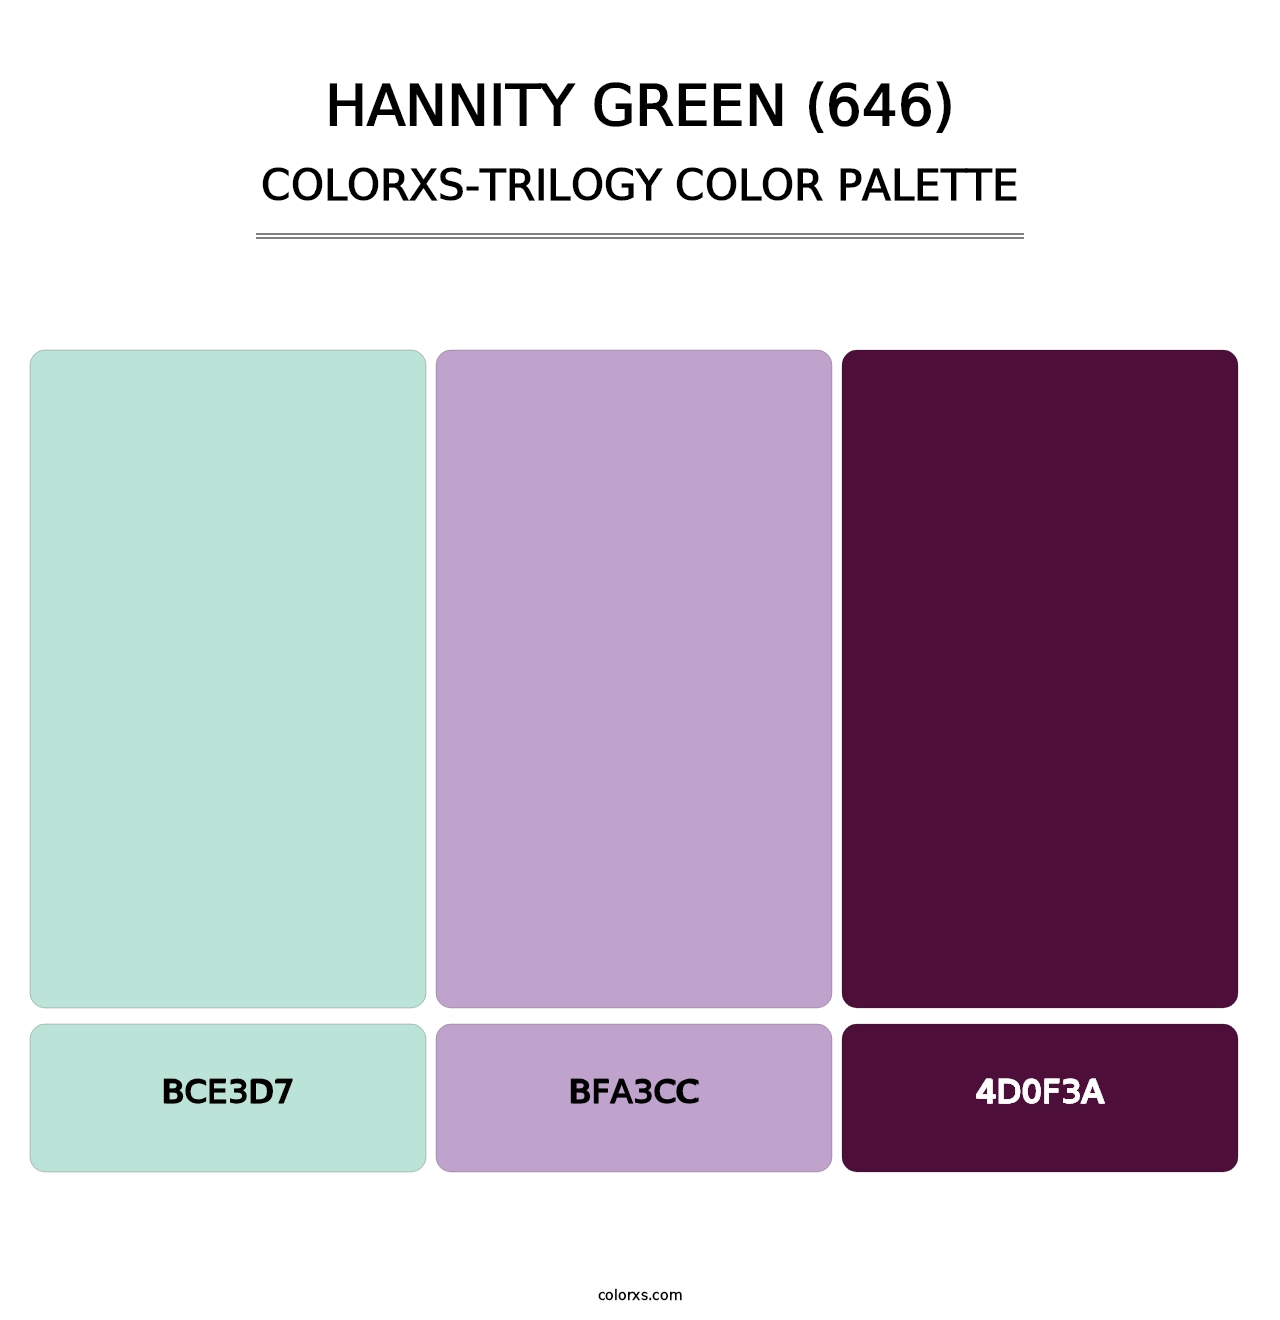 Hannity Green (646) - Colorxs Trilogy Palette